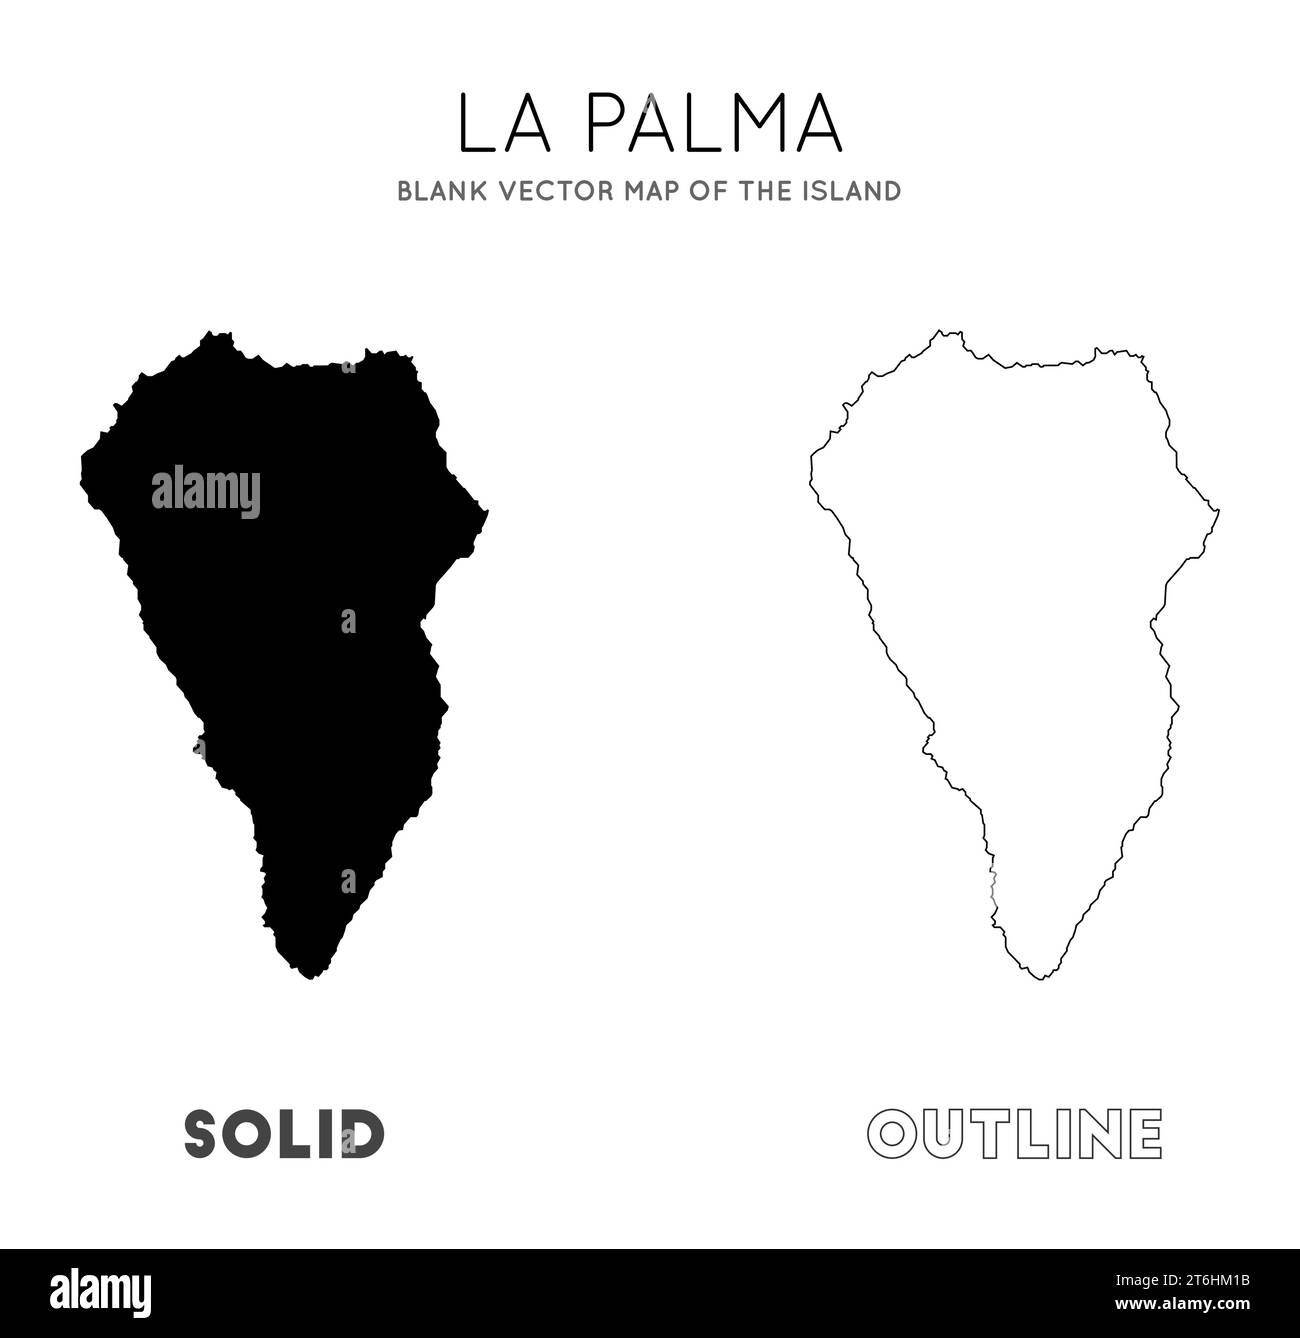 La Palma map. Blank vector map of the Island. Borders of La Palma for your infographic. Vector illustration. Stock Vector